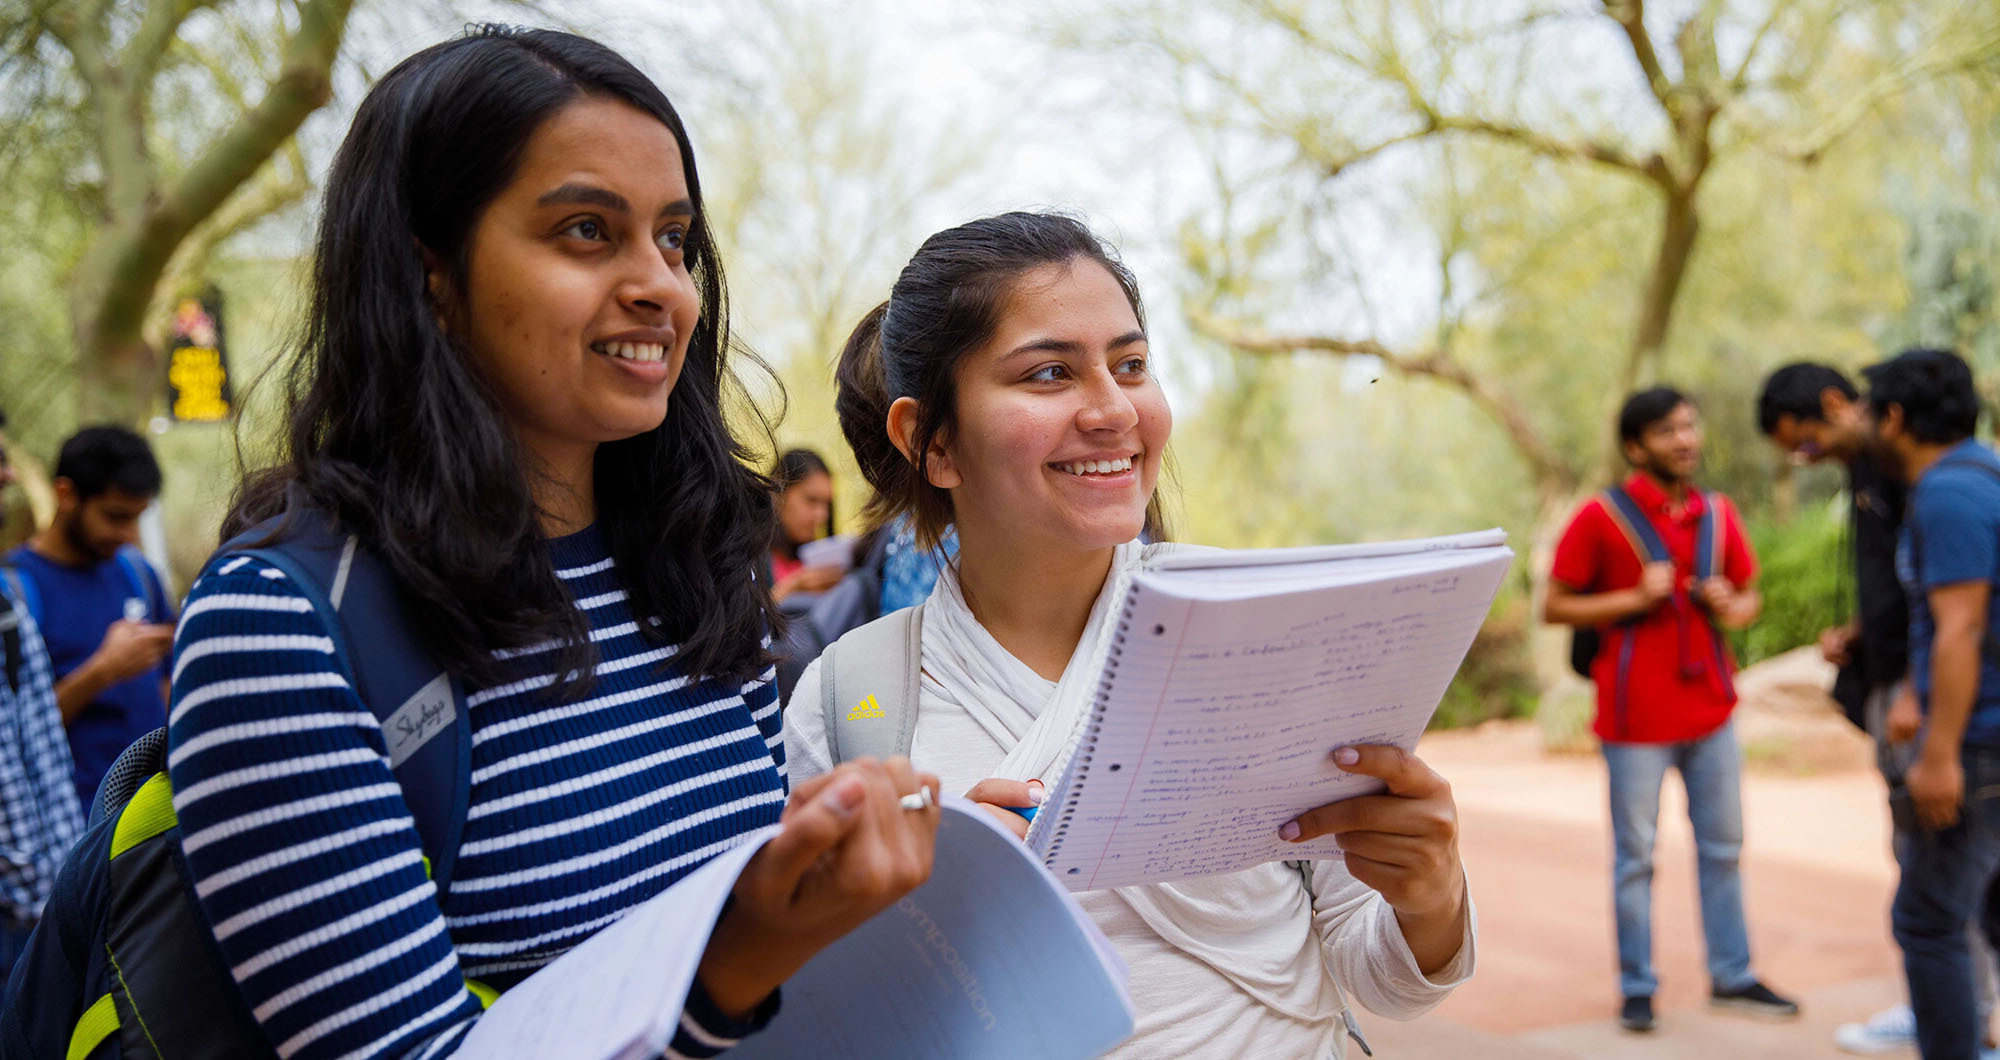 Two female students on a campus outdoors area, smiling and holding books with a few students in the background.